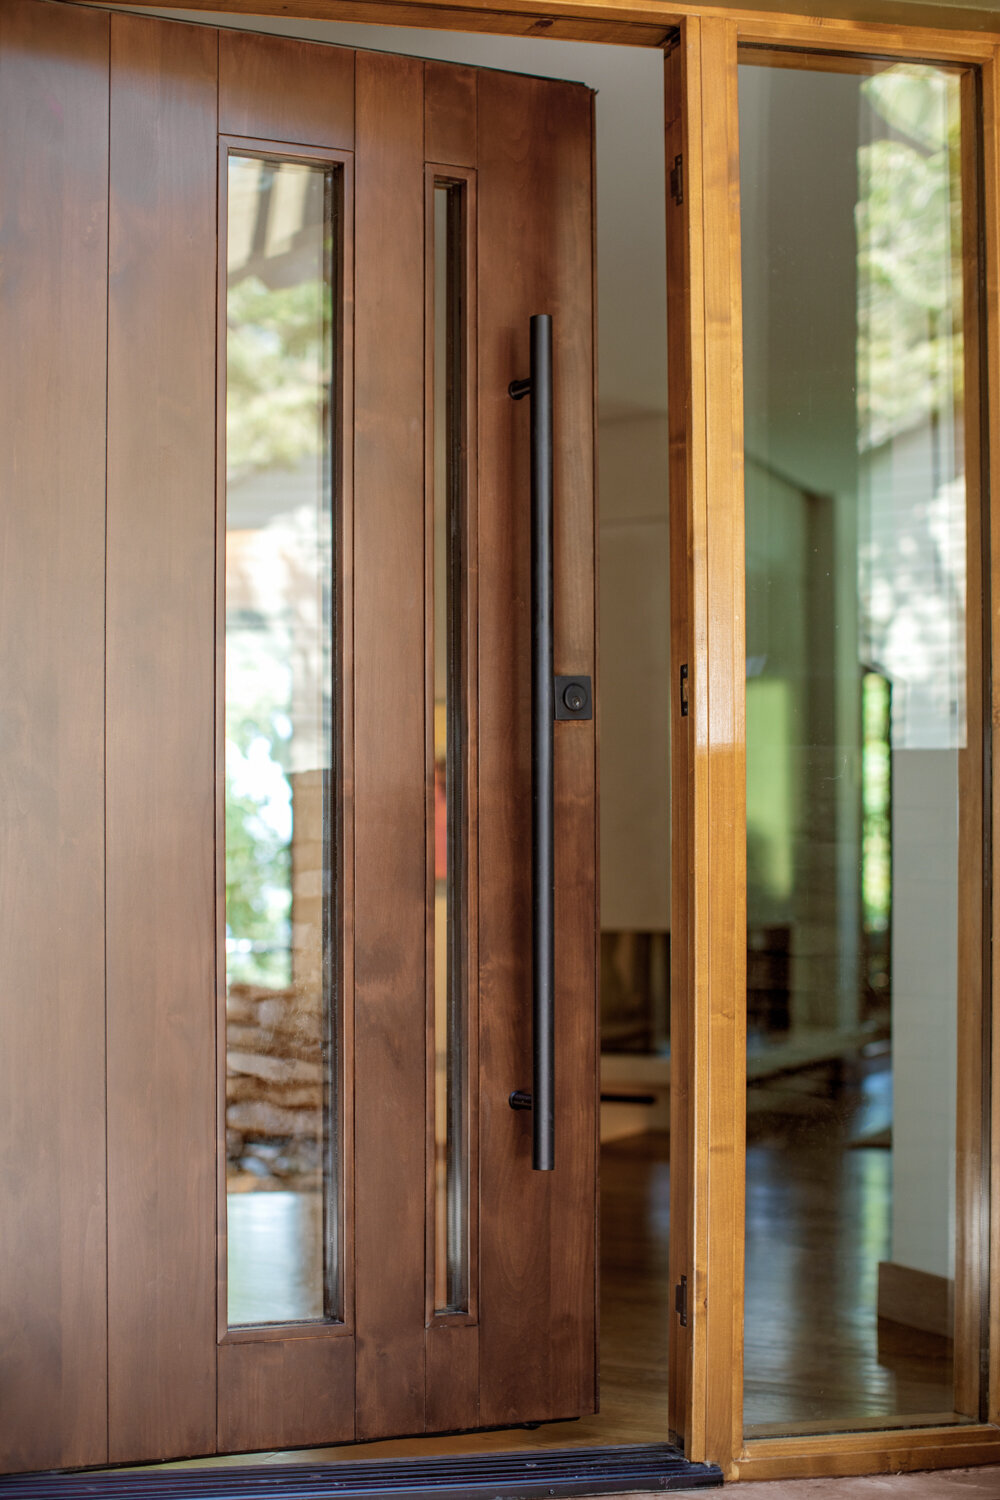 Panageries Residential Interior Design | Pacific NW Modern Dwelling Front Door Inviting You In